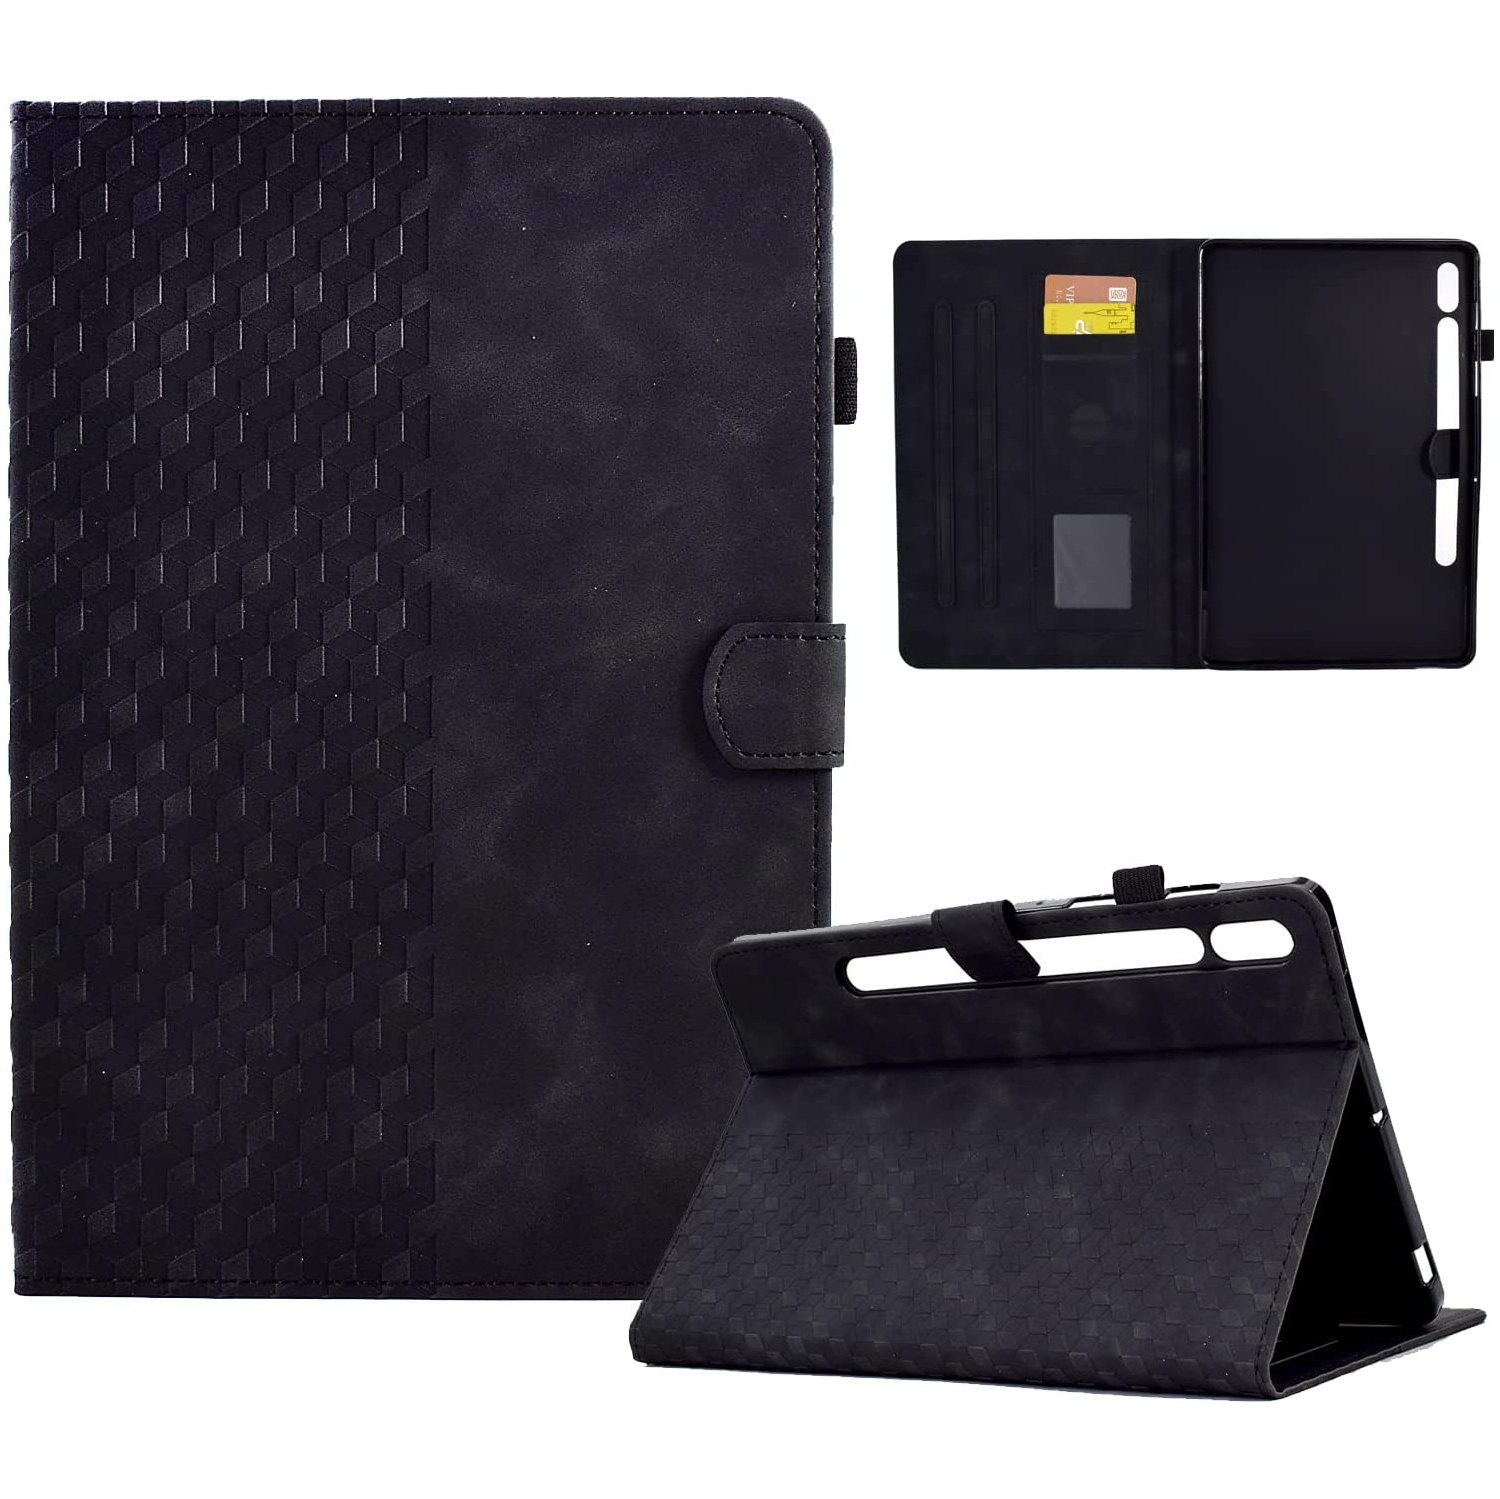 D Samsung Galaxy Tab S8 Case 2022 / Galaxy Tab S7 Case 2020 11 (SM-X700/X706/T870/T875/T876) Leather Shockproof Protective Wallet Folio Cover with [Adjustable Kickstand] [Card Slot